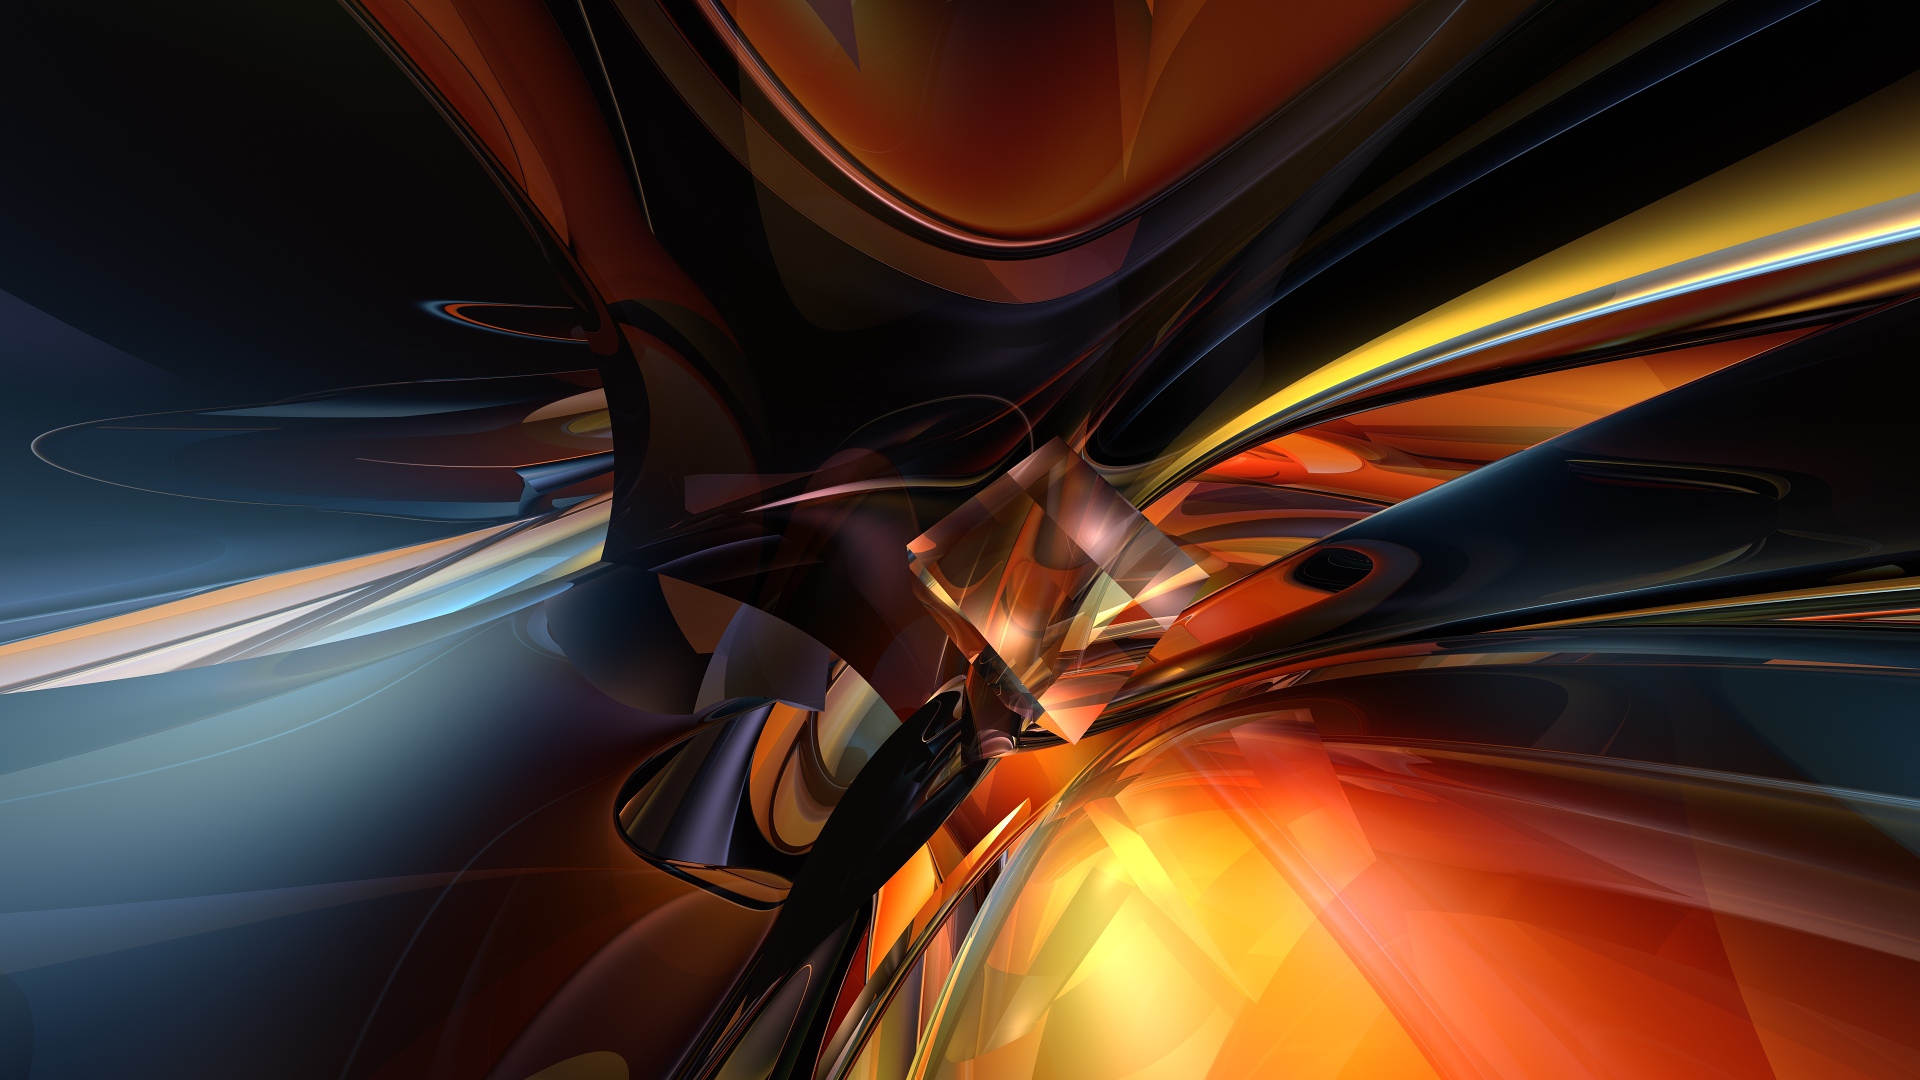 Download Abstract Artistic HD Wallpaper